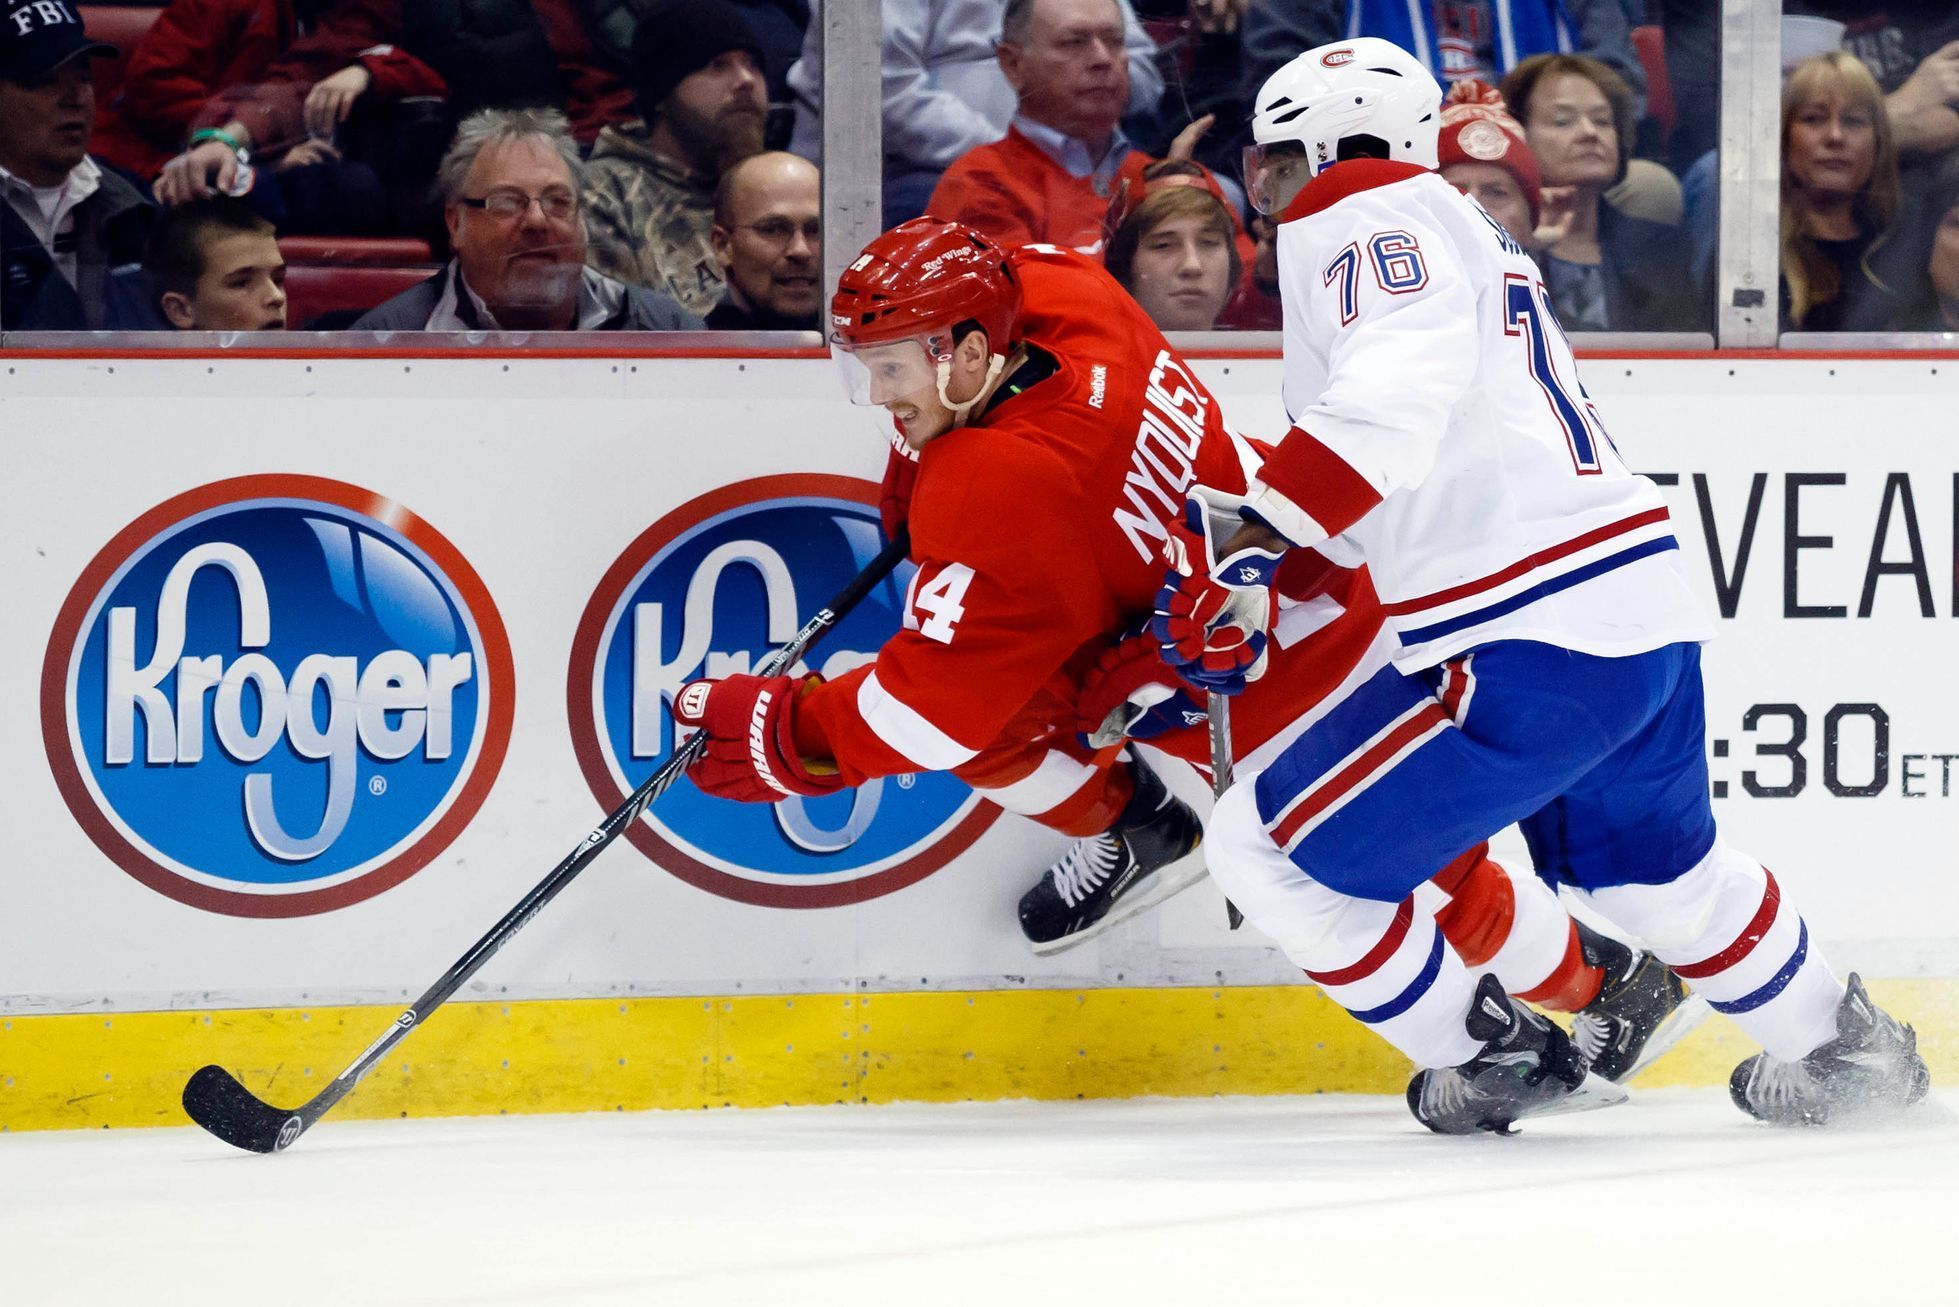 NHL: Montreal Canadiens at Detroit Red Wings (Nyquist a Subban)